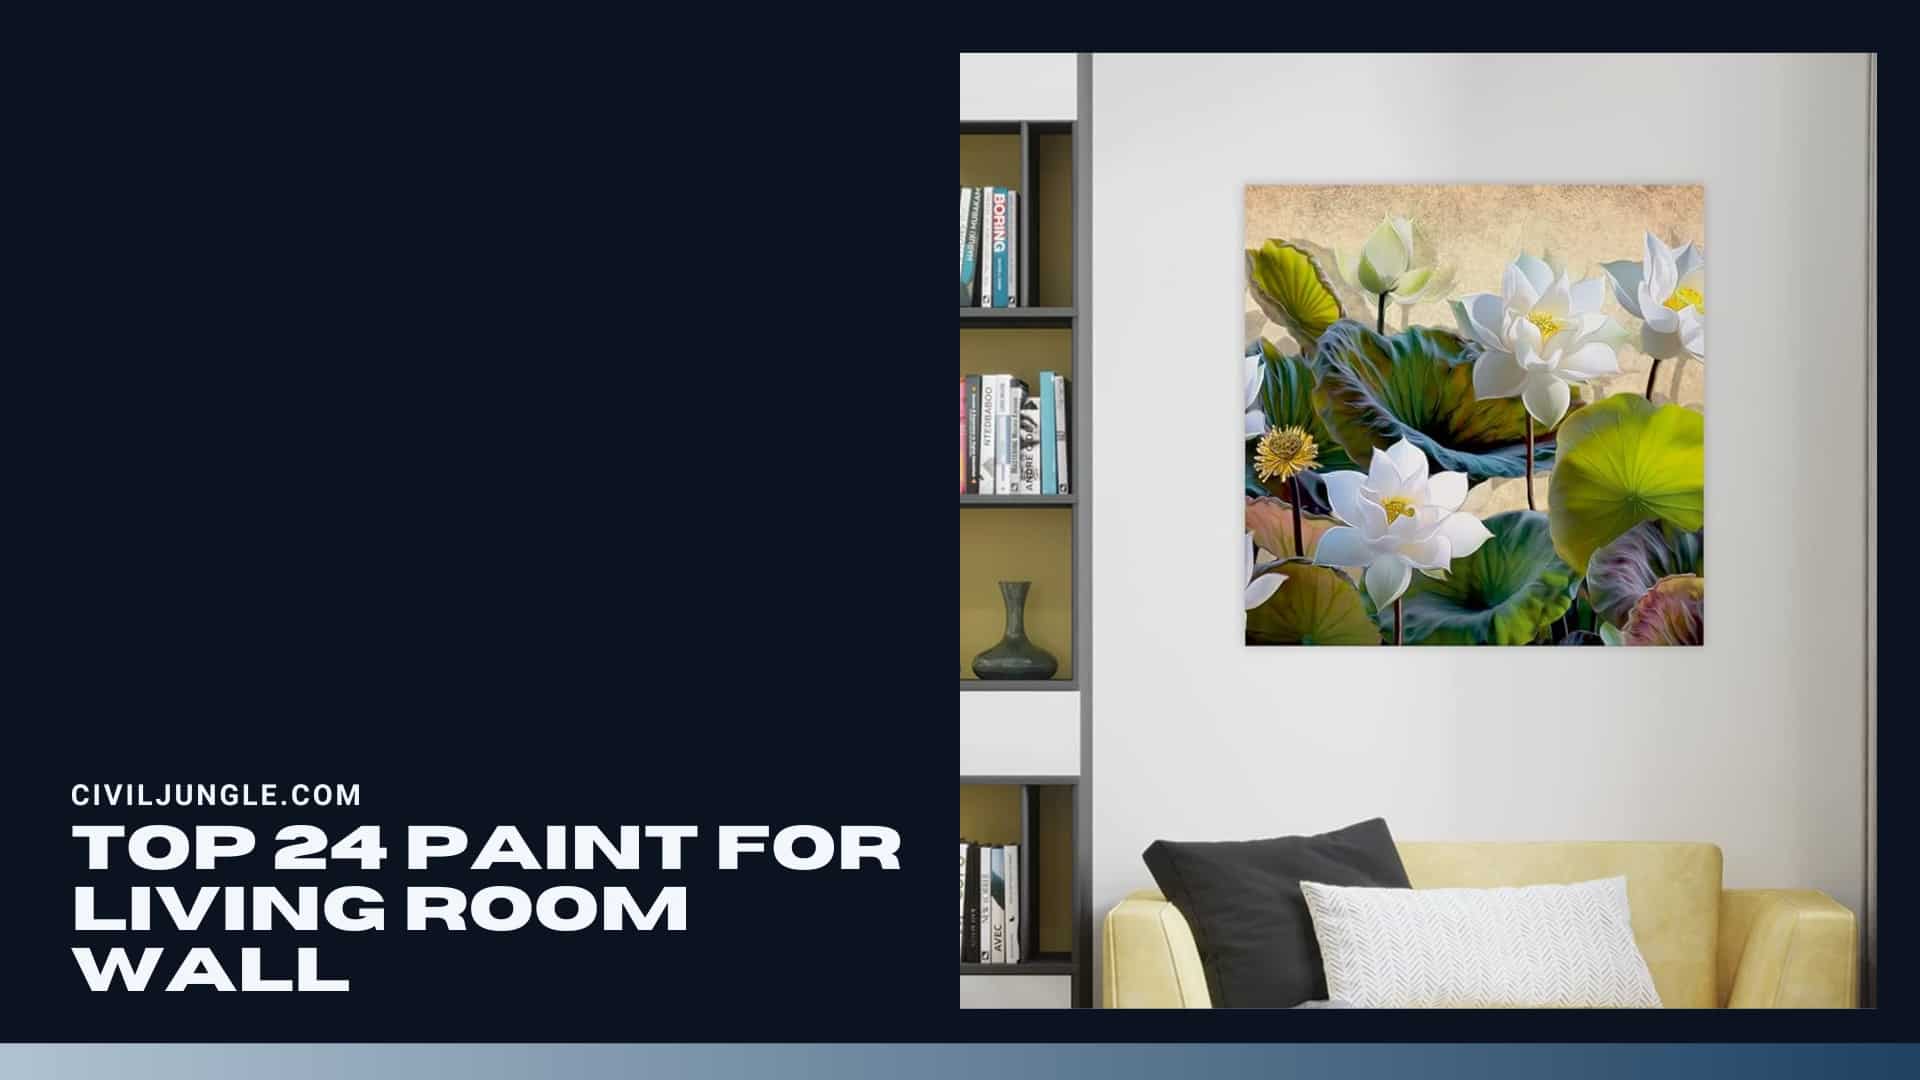 Top 24 Paint for Living Room Wall